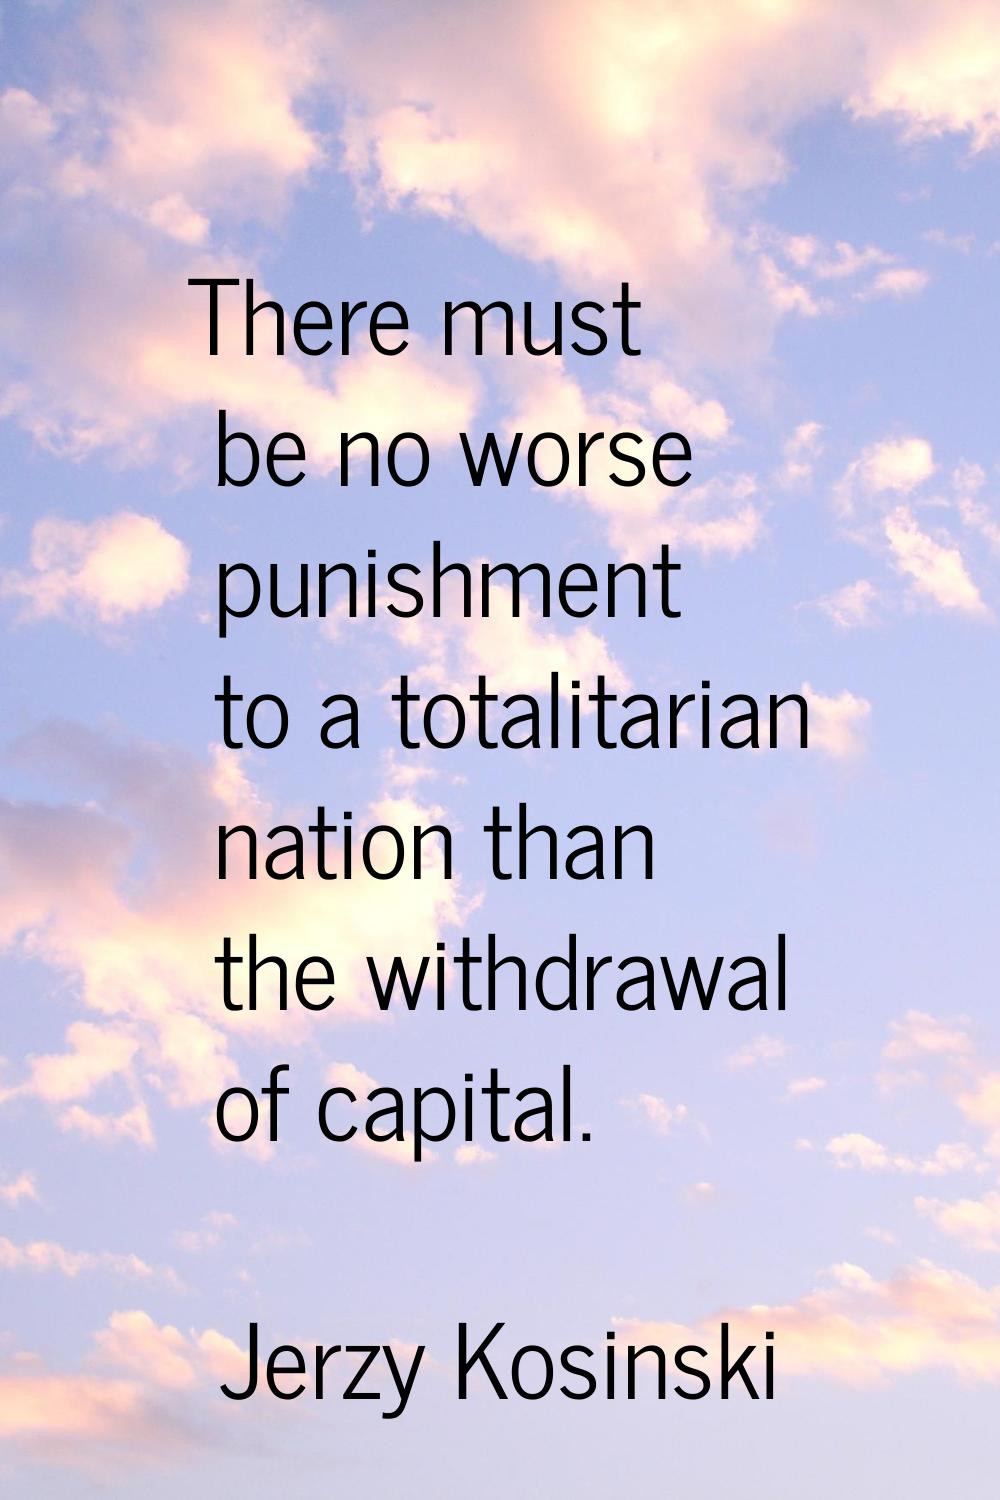 There must be no worse punishment to a totalitarian nation than the withdrawal of capital.